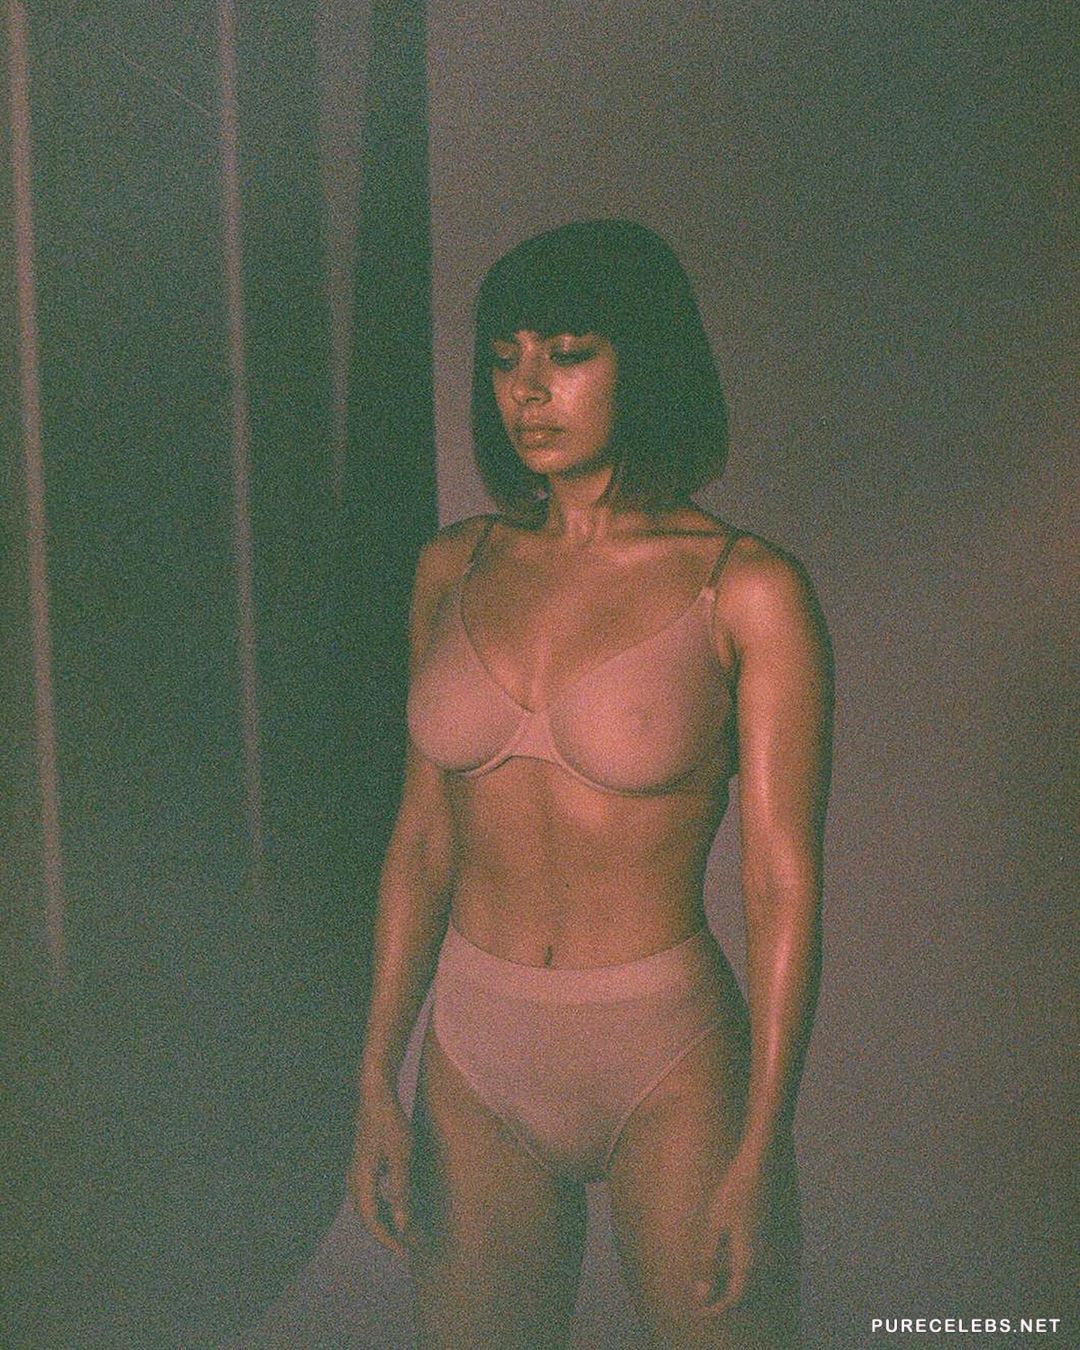 Leaked charli xcx topless and transparent wet dress photos